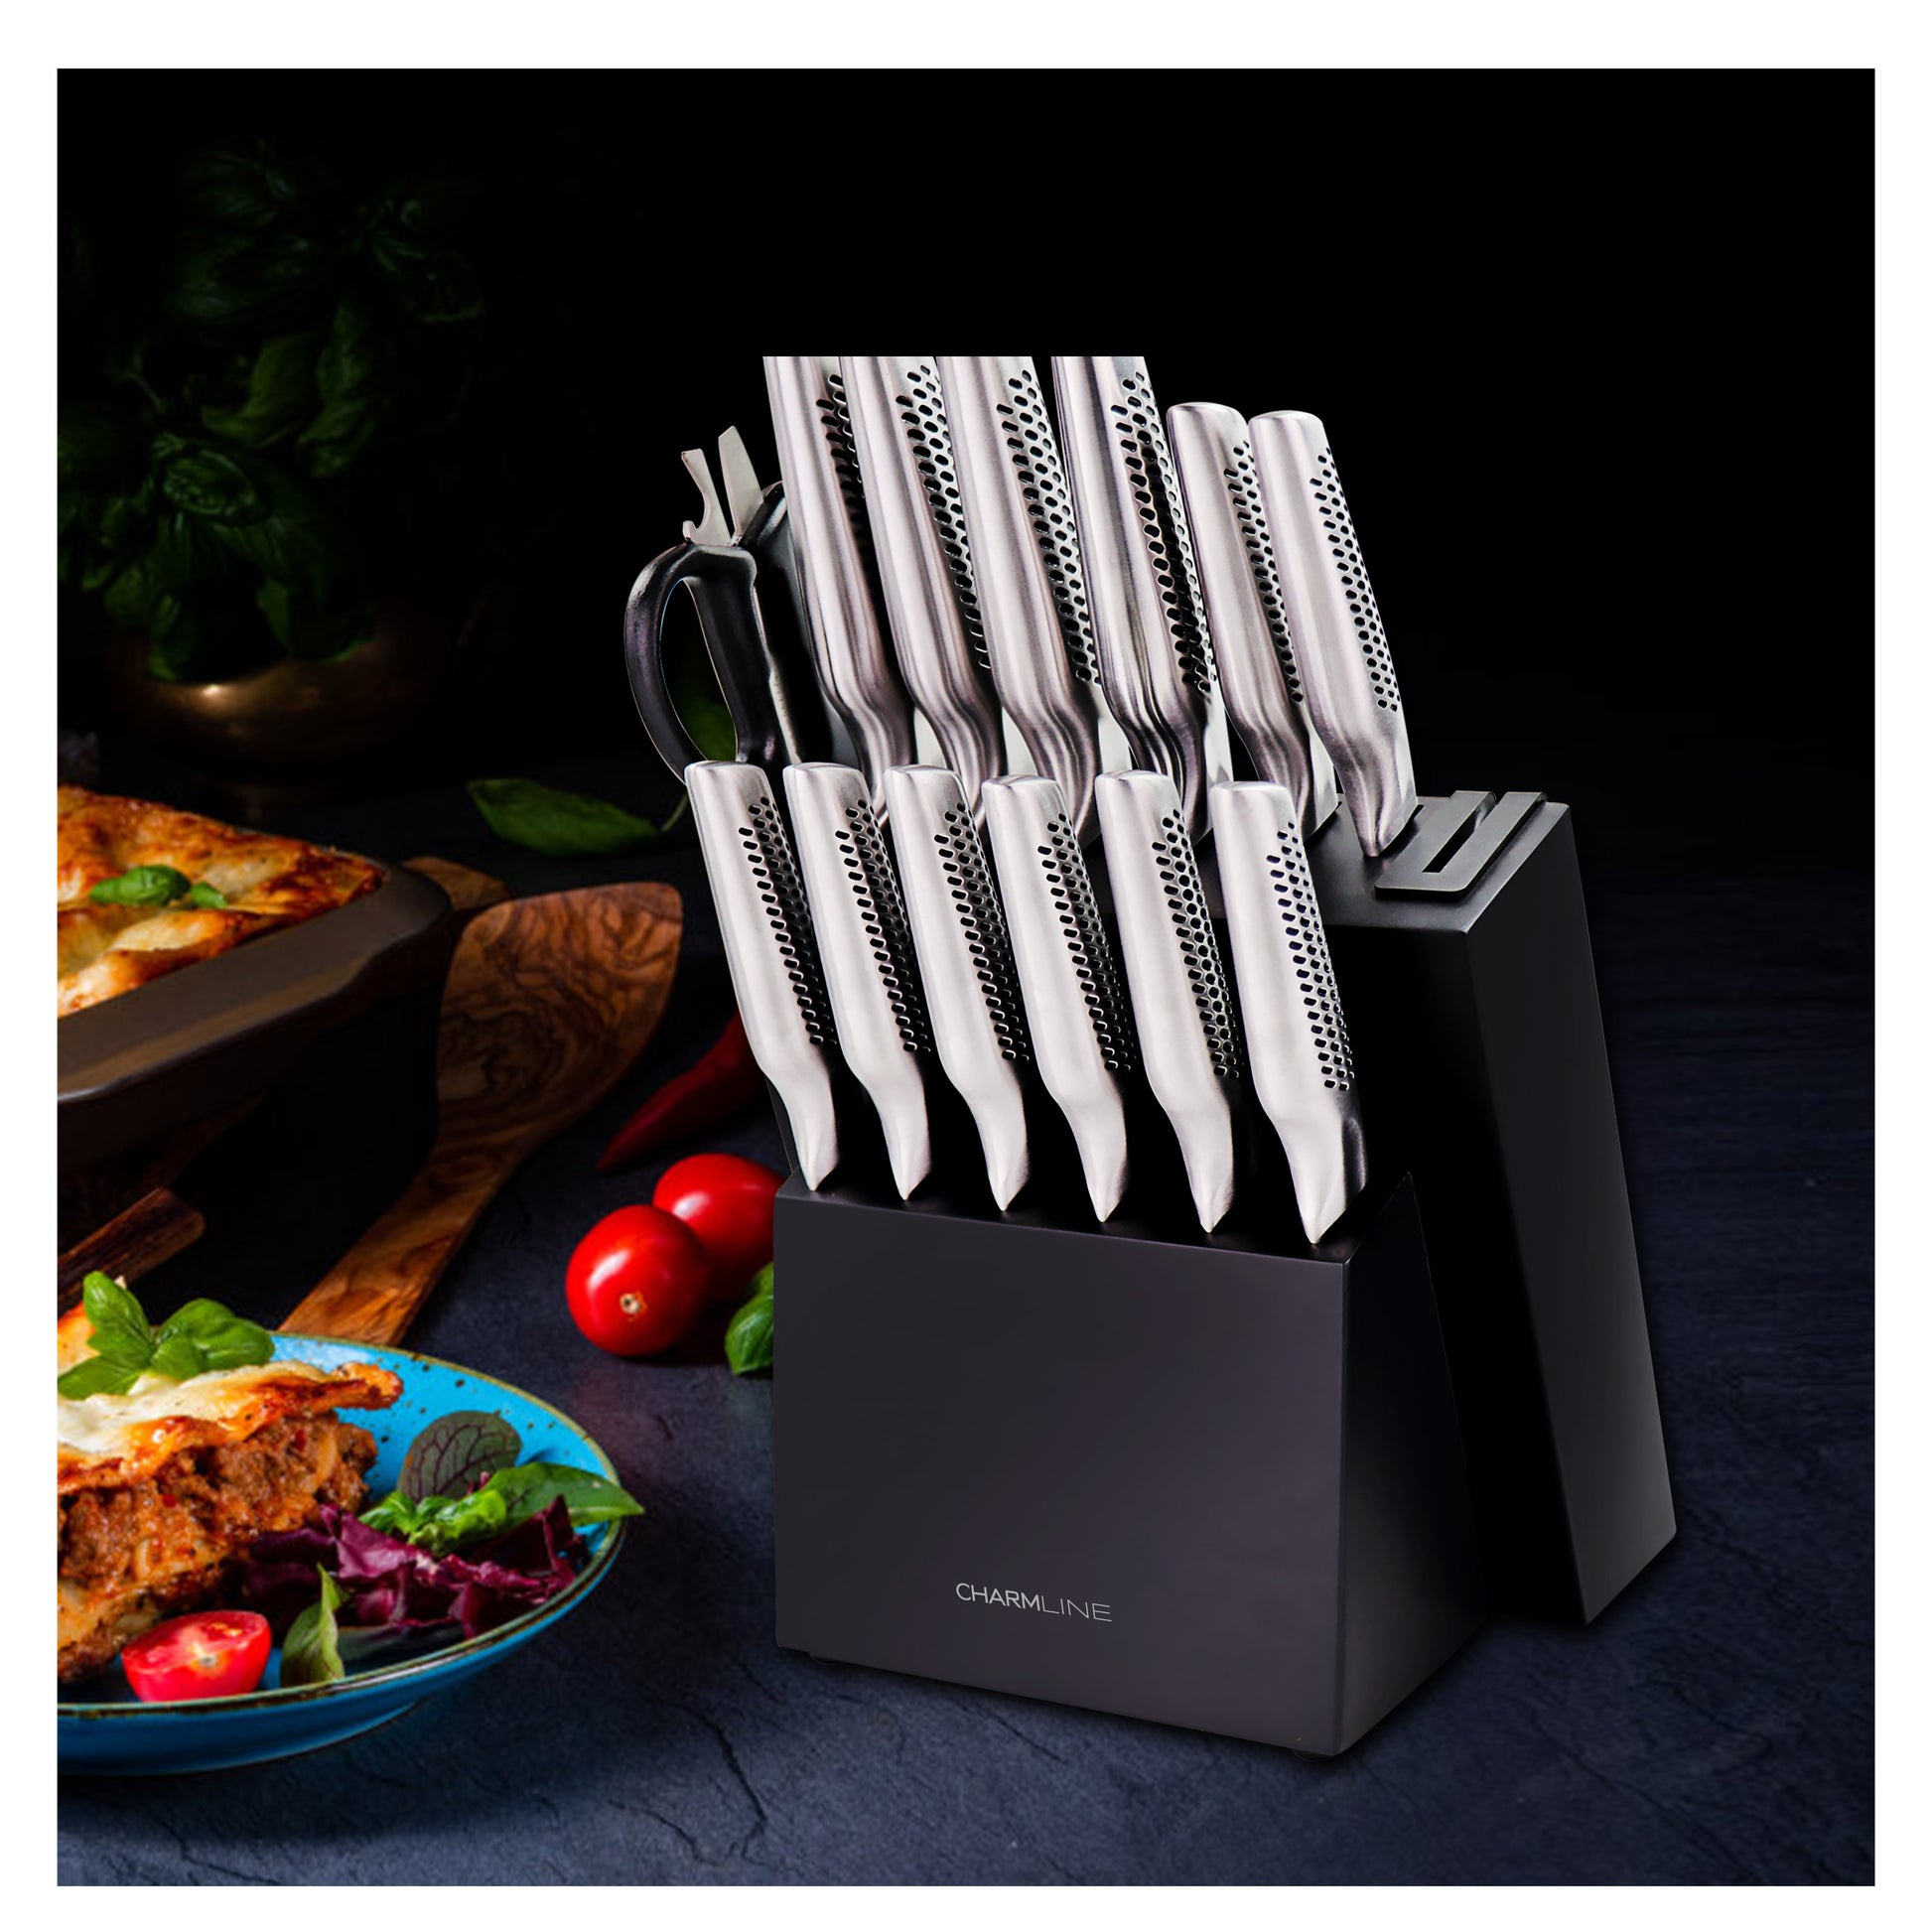  Charmline Smart Cutting Board And Knife Set With